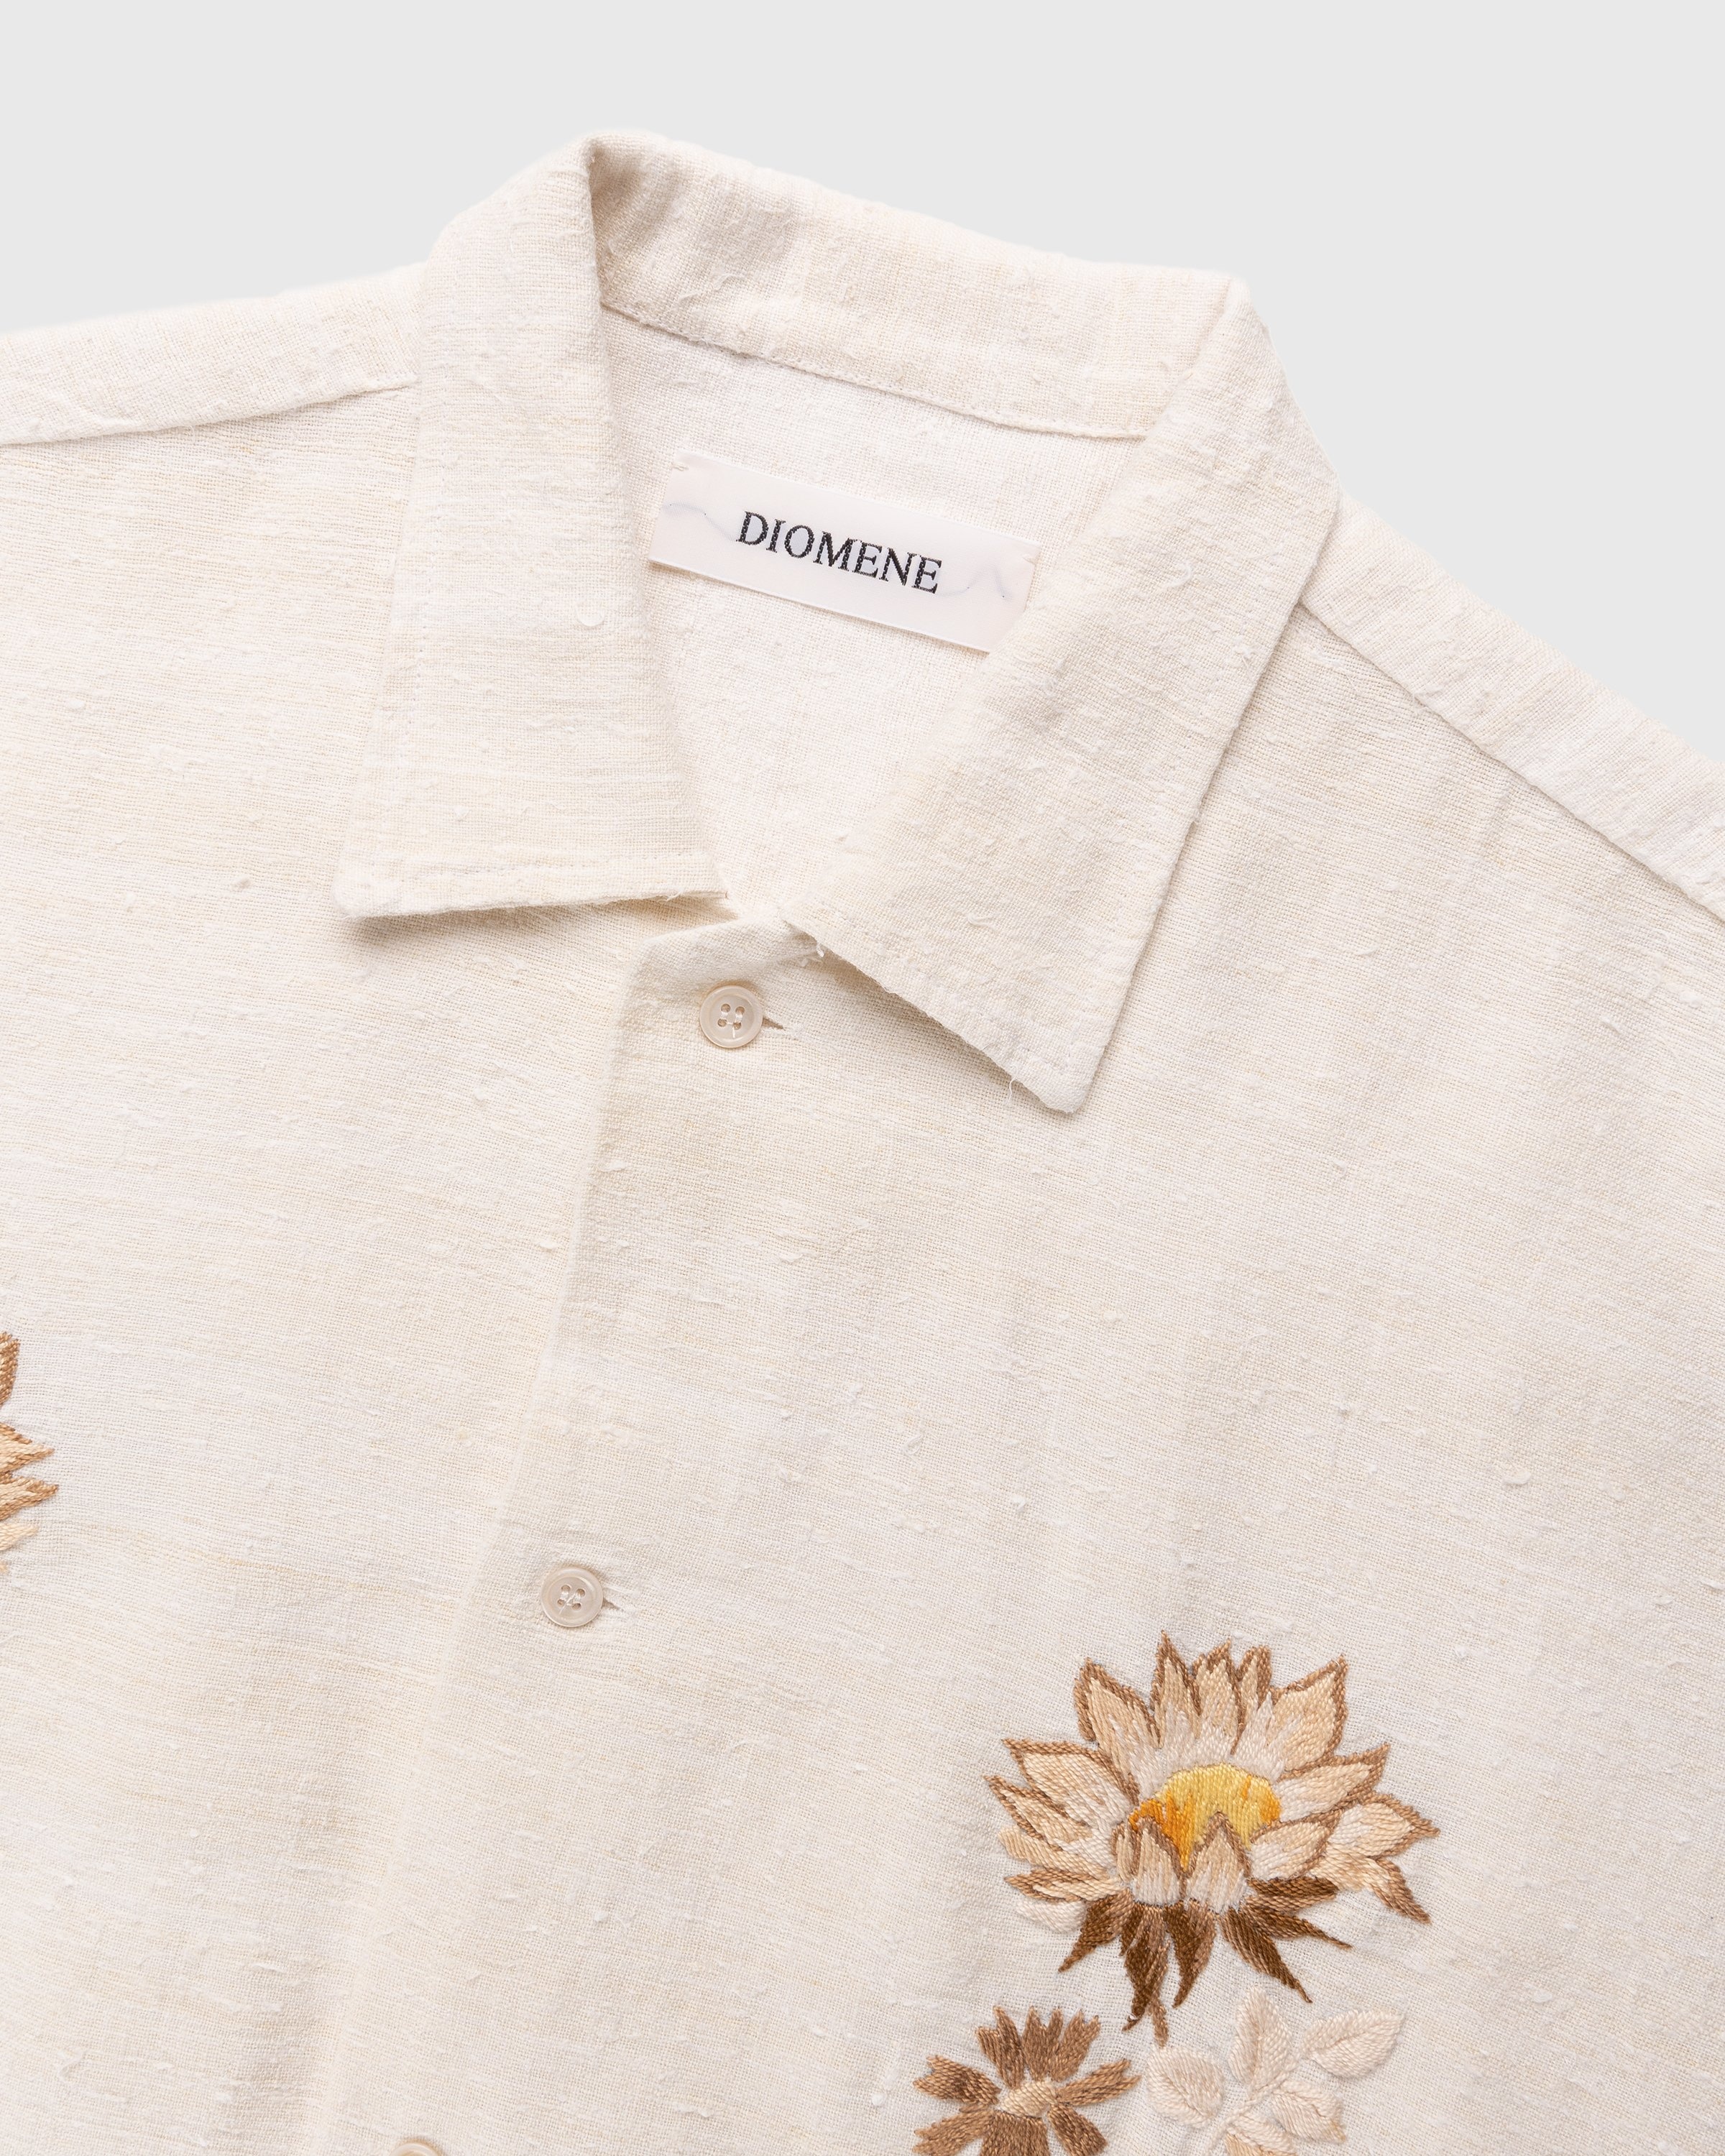 Diomene by Damir Doma – Embroidered Vacation Shirt Cream - Shirts - White - Image 4